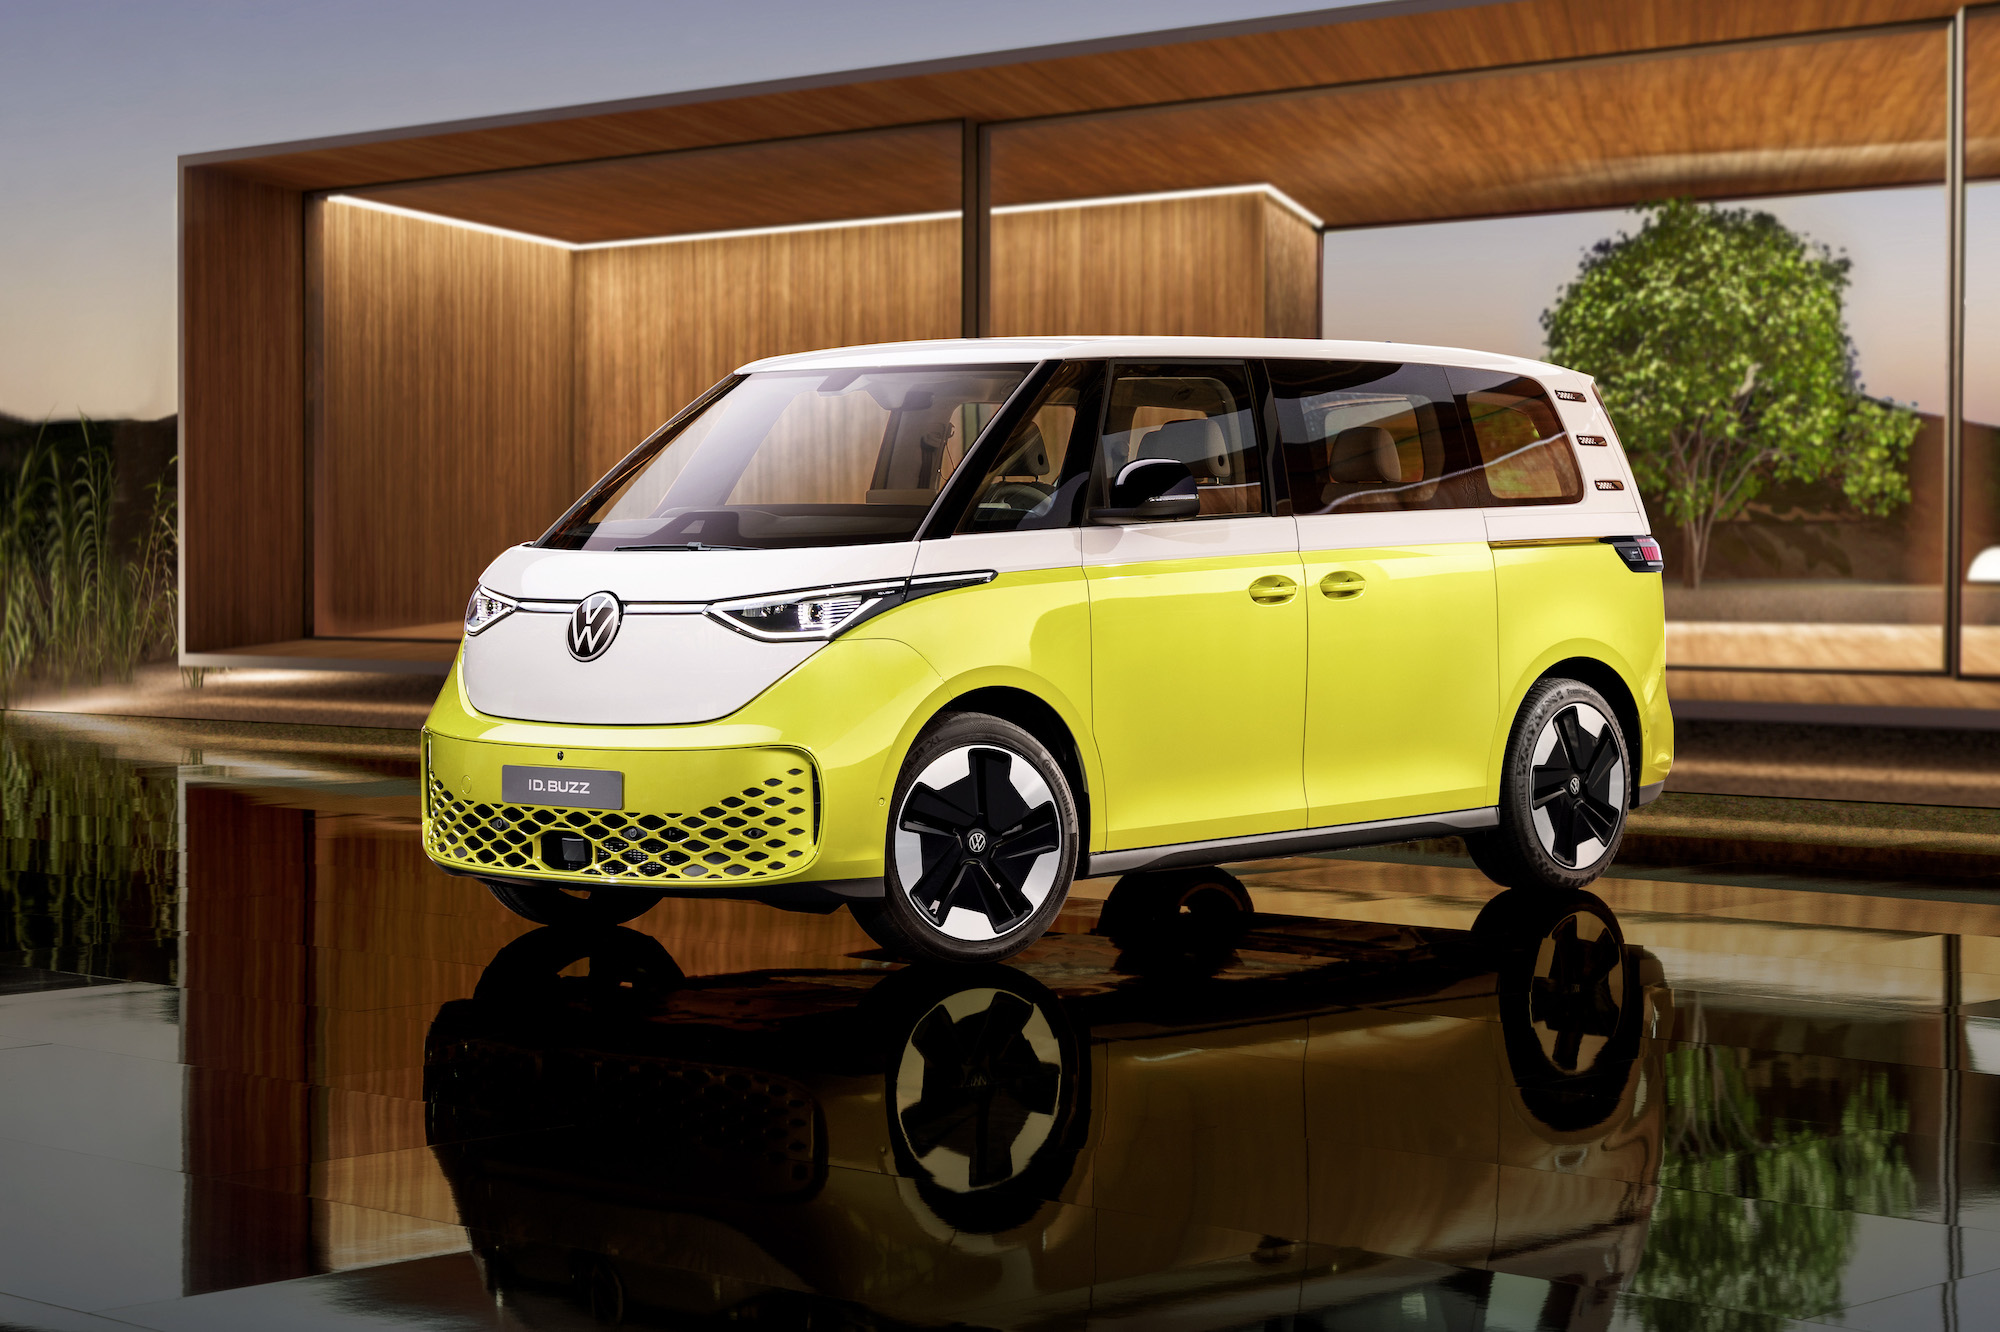 The iconic VW Bus is becoming an electric vehicle